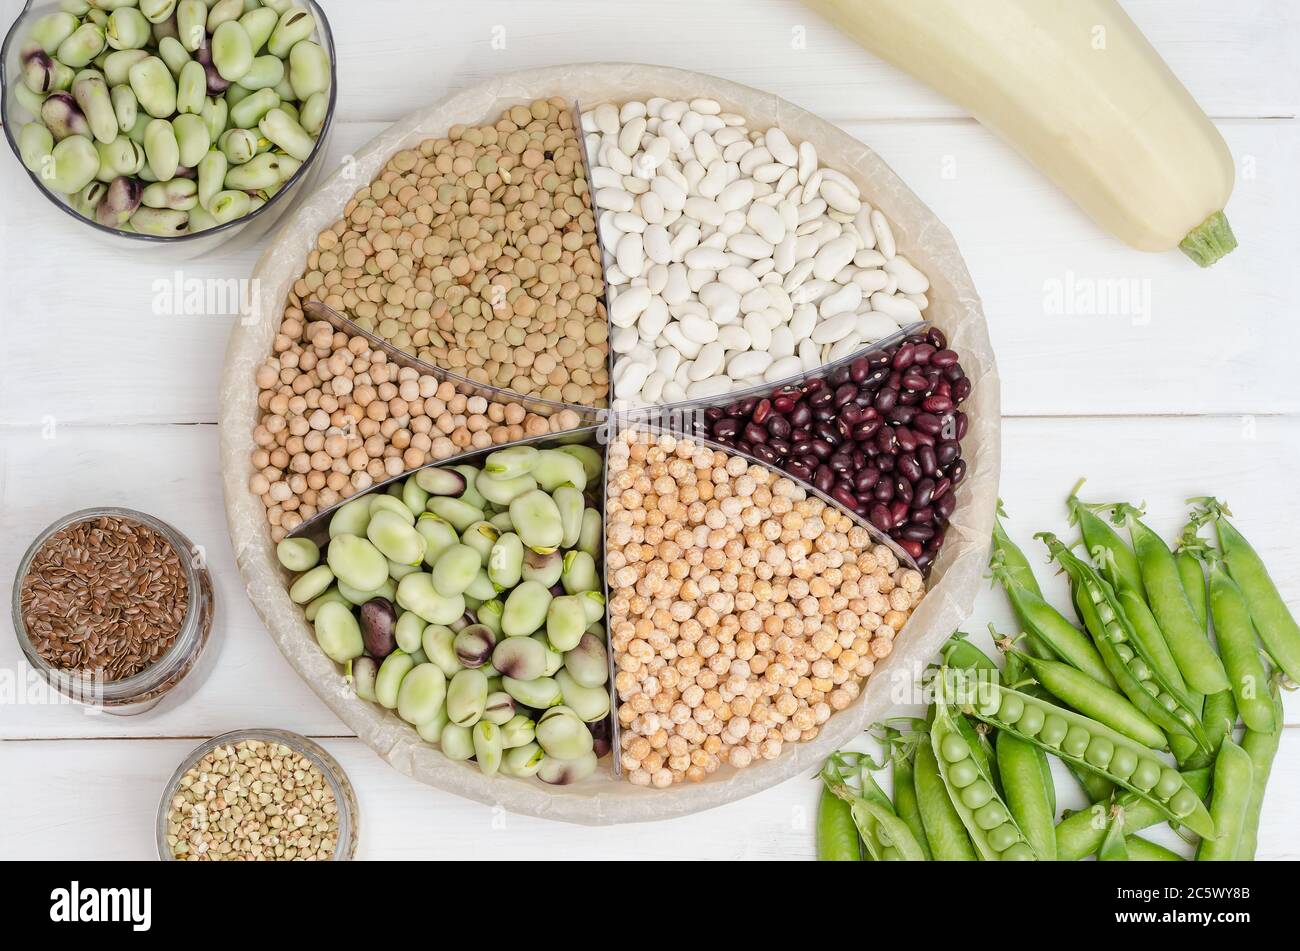 Vegan source of protein. Beans, lentils, peas, chickpeas, beans. Top view on a white table. vegetarian food. Stock Photo